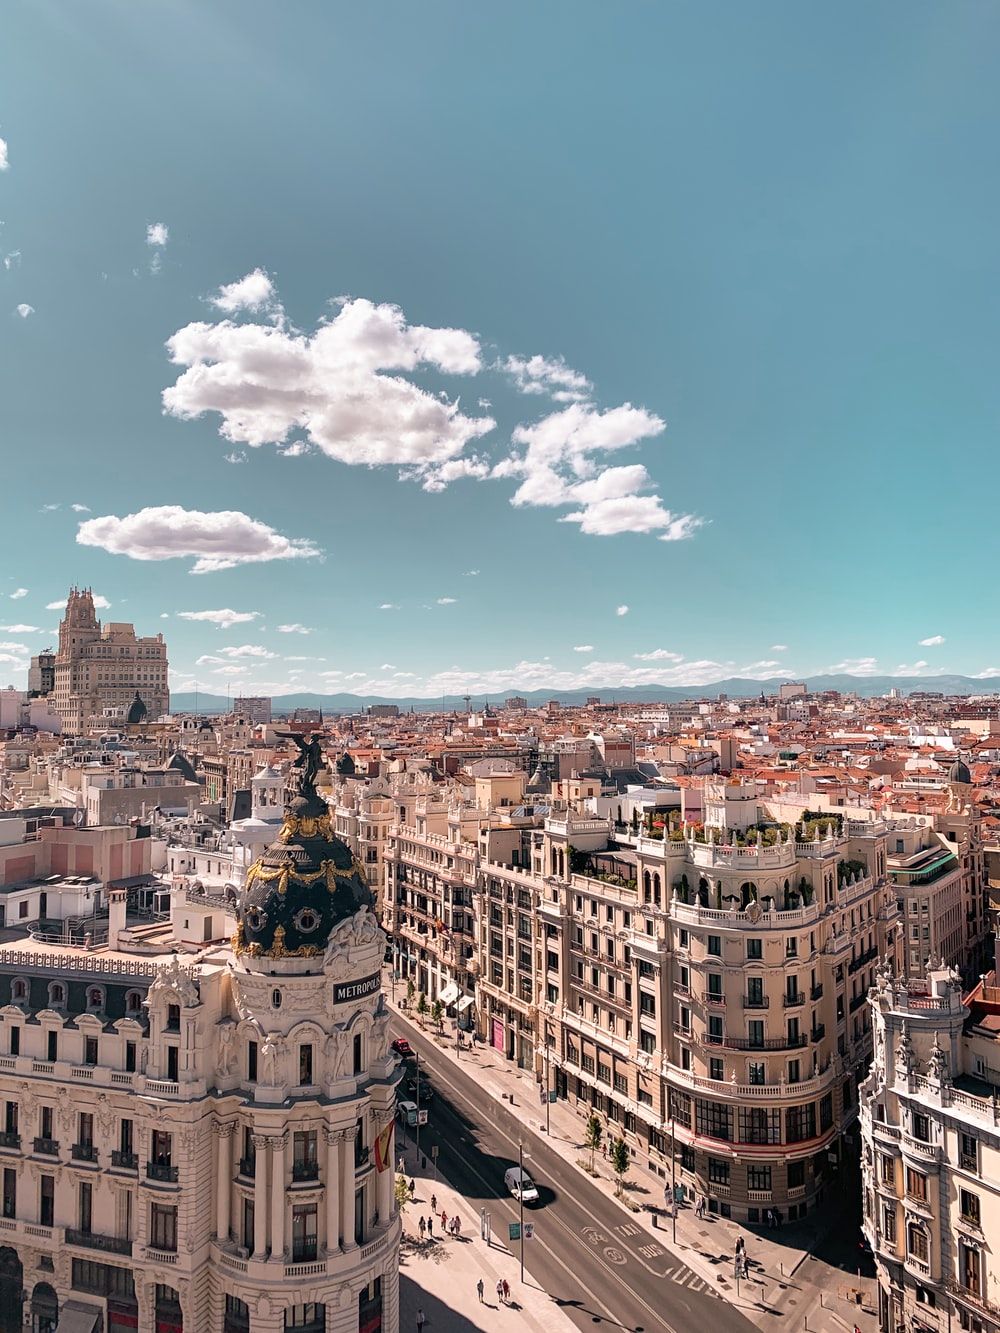 Madrid Picture. Download Free Image